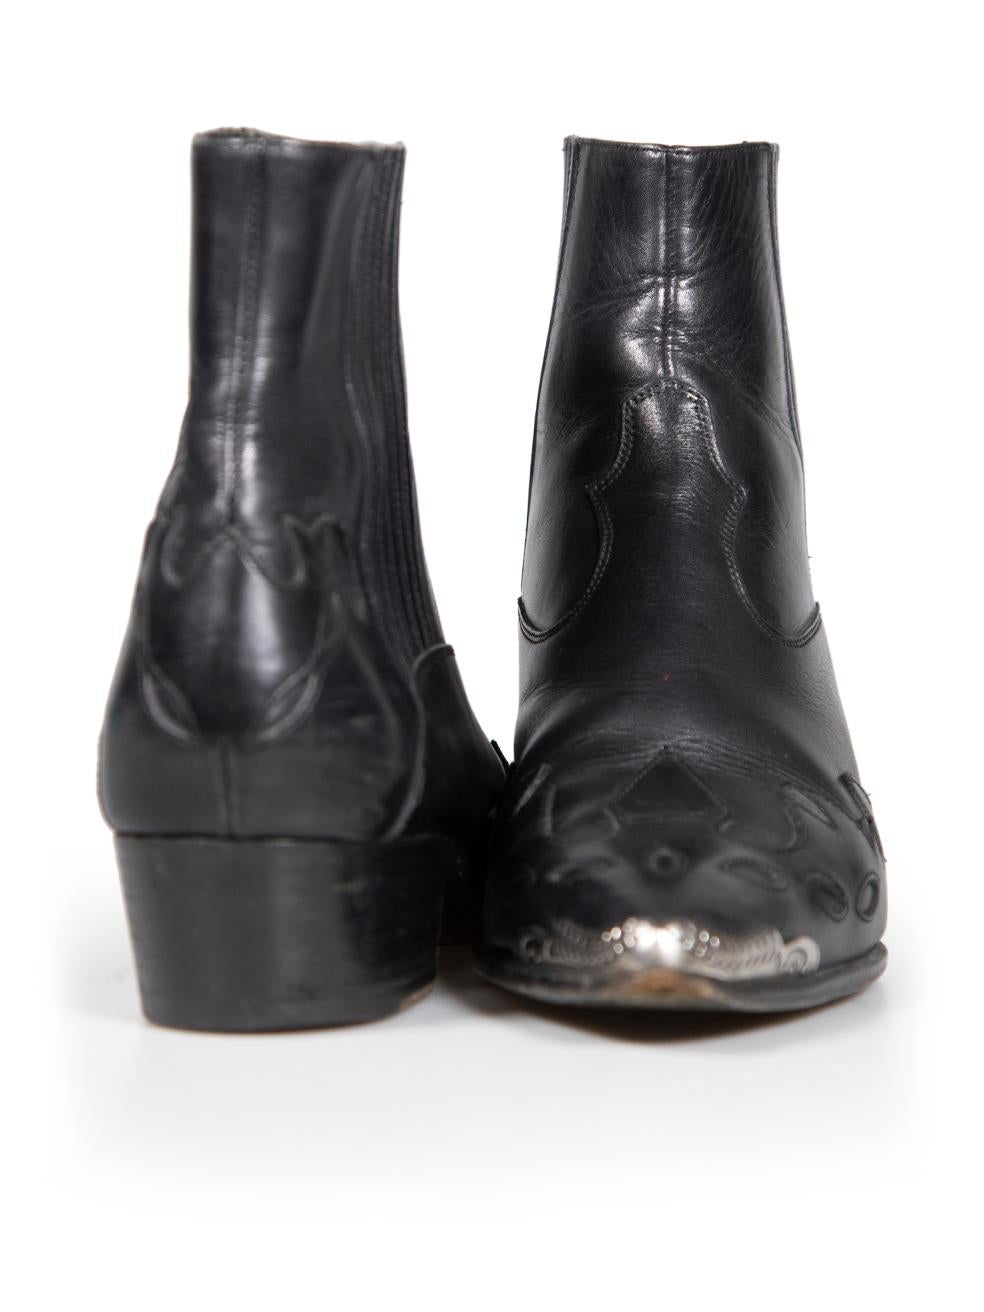 Saint Laurent Black Leather Western Cowboy Boots Size IT 37 In Good Condition For Sale In London, GB